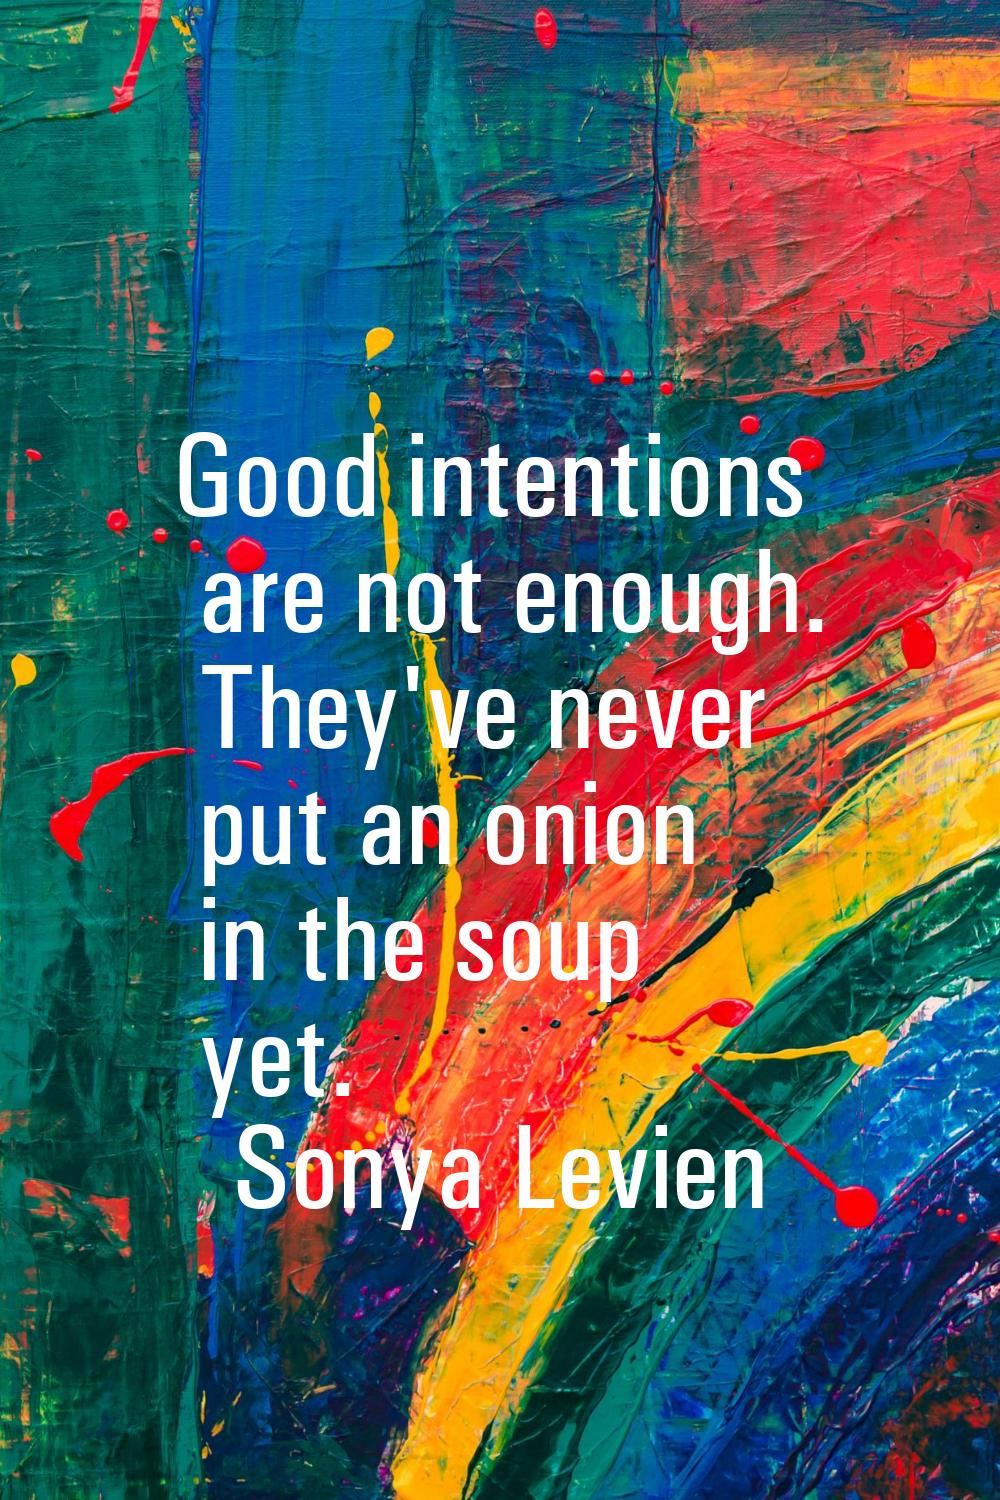 Good intentions are not enough. They've never put an onion in the soup yet.